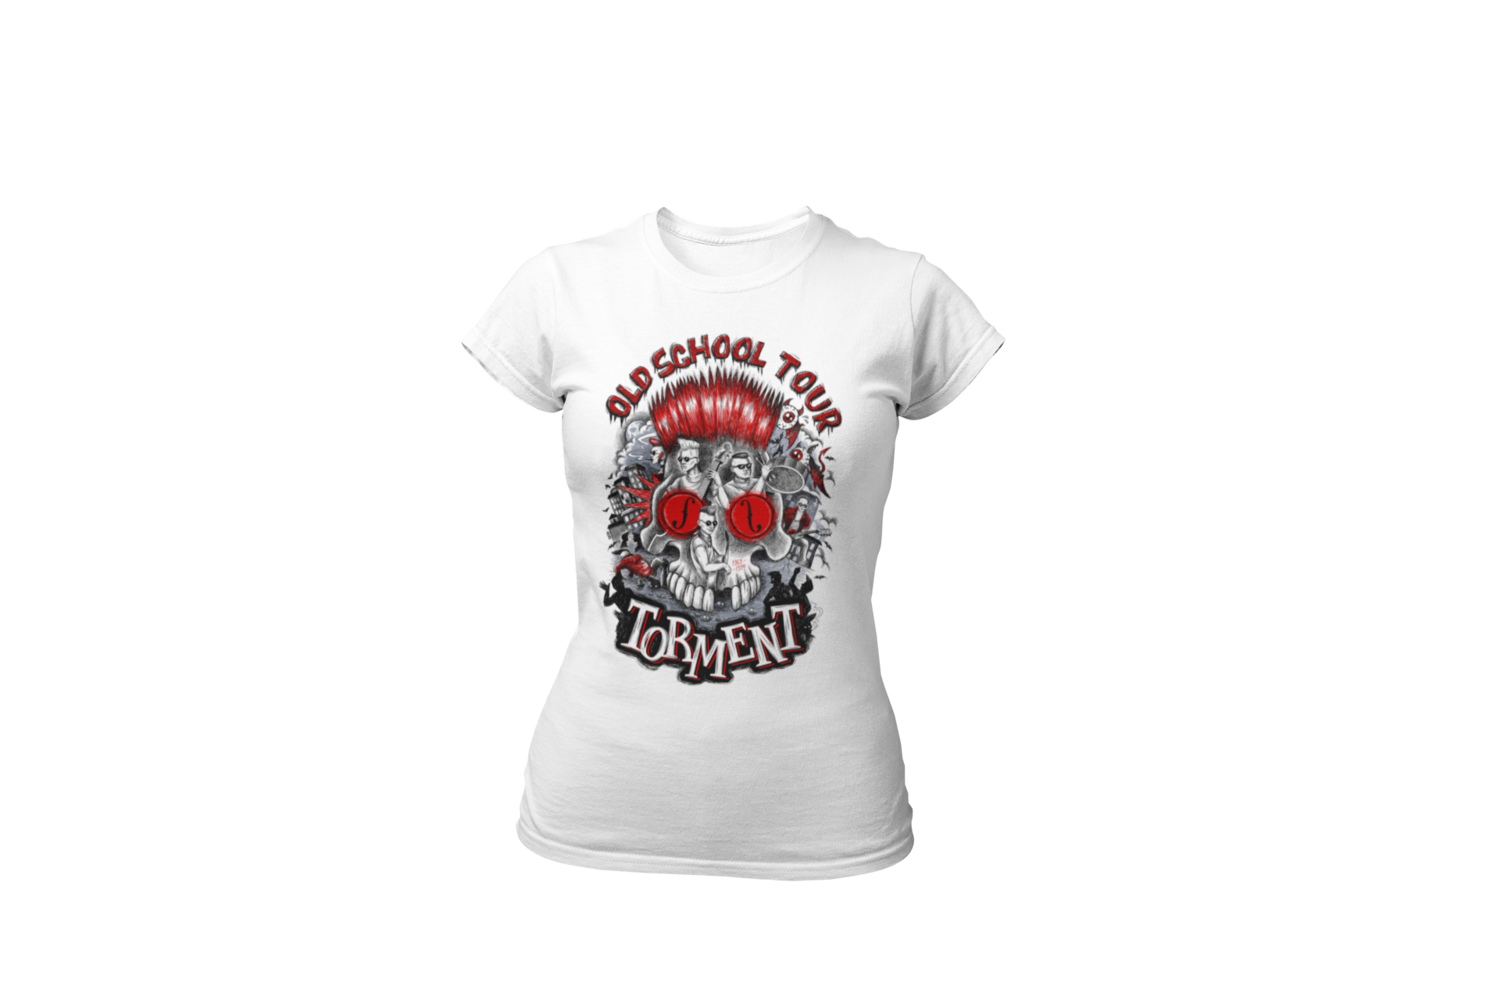 TORMENT "Old school tour" tshirt for WOMEN